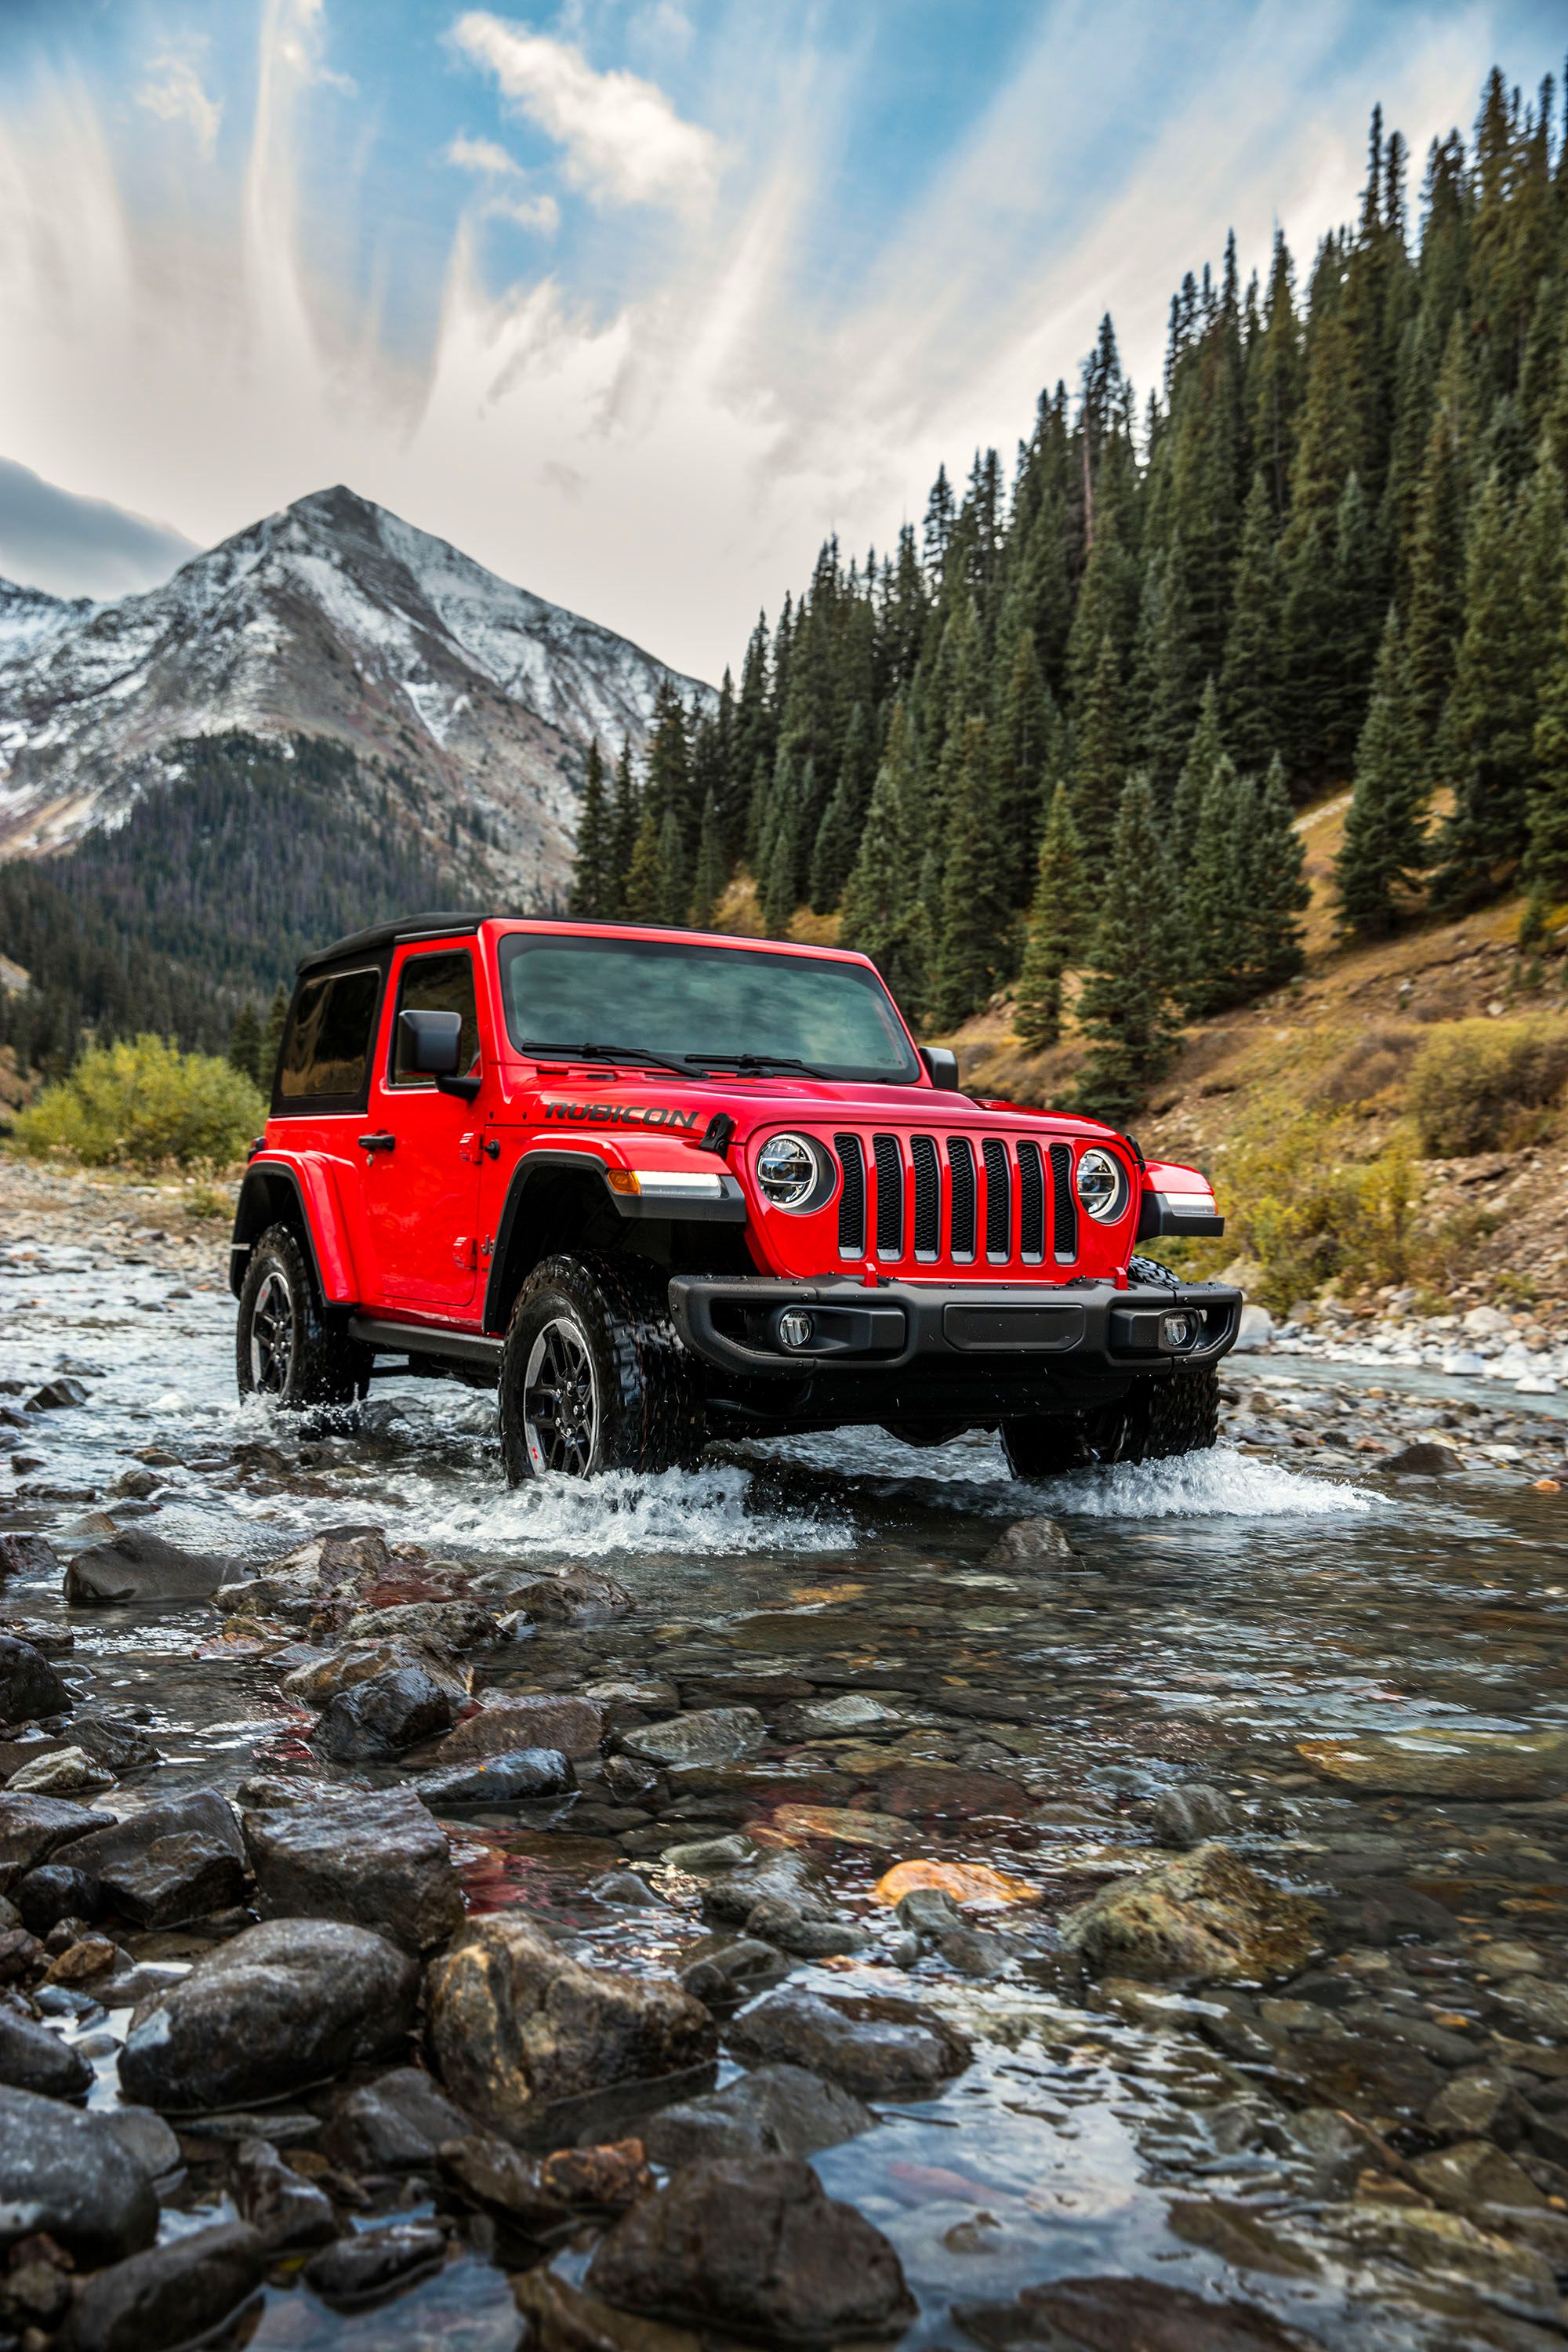 2018 2018 Jeep Wrangler Sheds Some Weight; Gains Capability